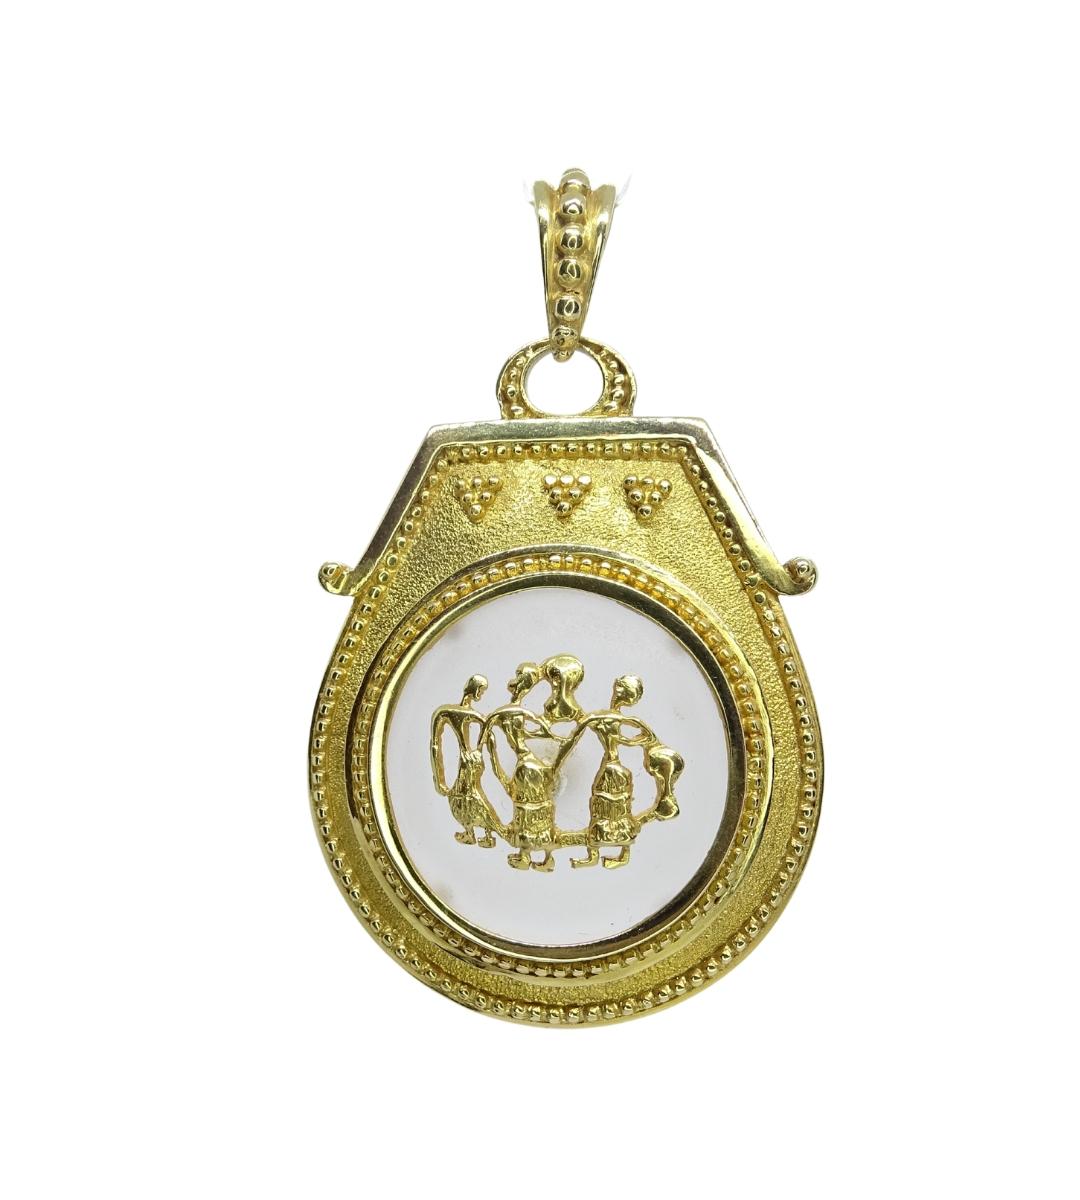 Brooch-Pendant in 18 kt gold and crystal by the goldsmith ILIAS LALAONIS 1